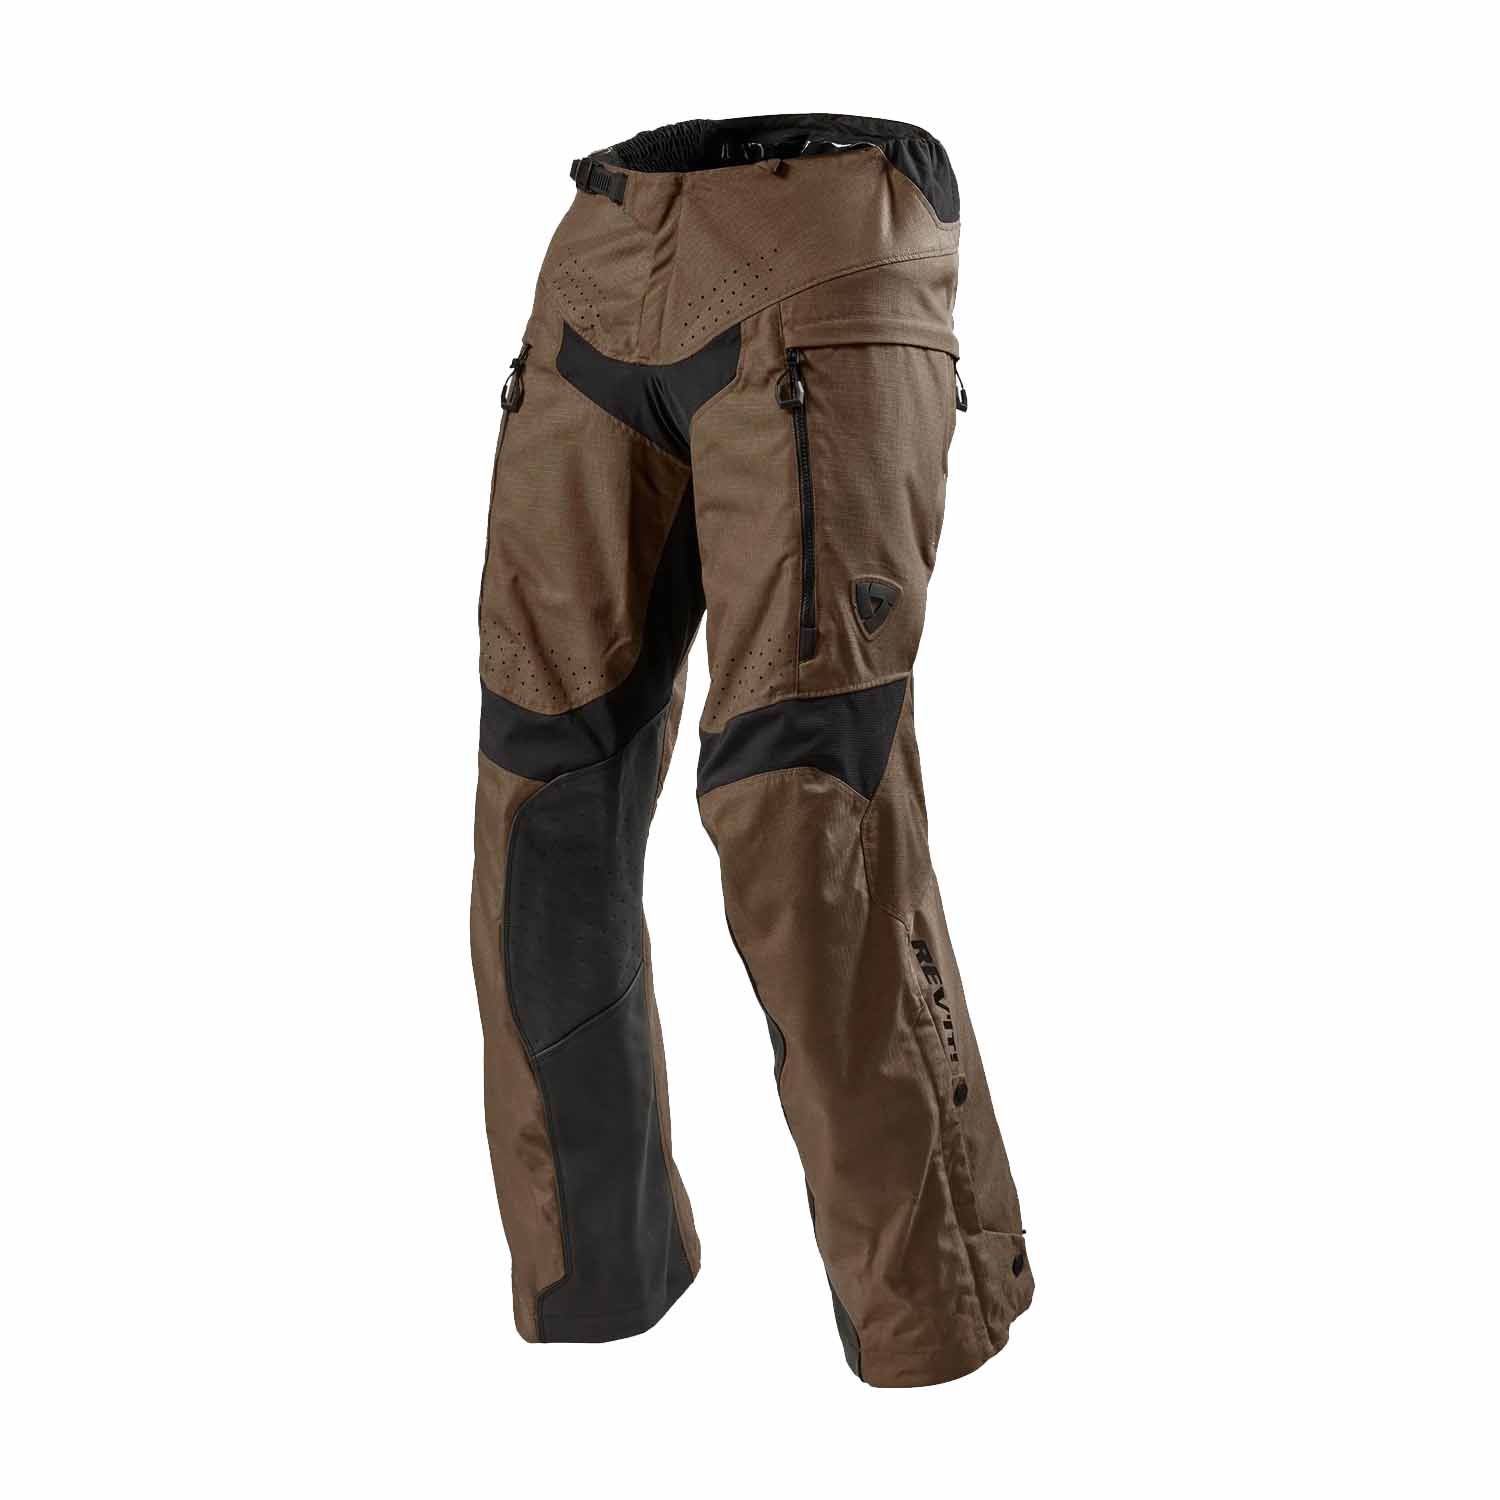 Image of REV'IT! Continent Pants Brown Standard Motorcycle Pants Size S ID 8700001369268